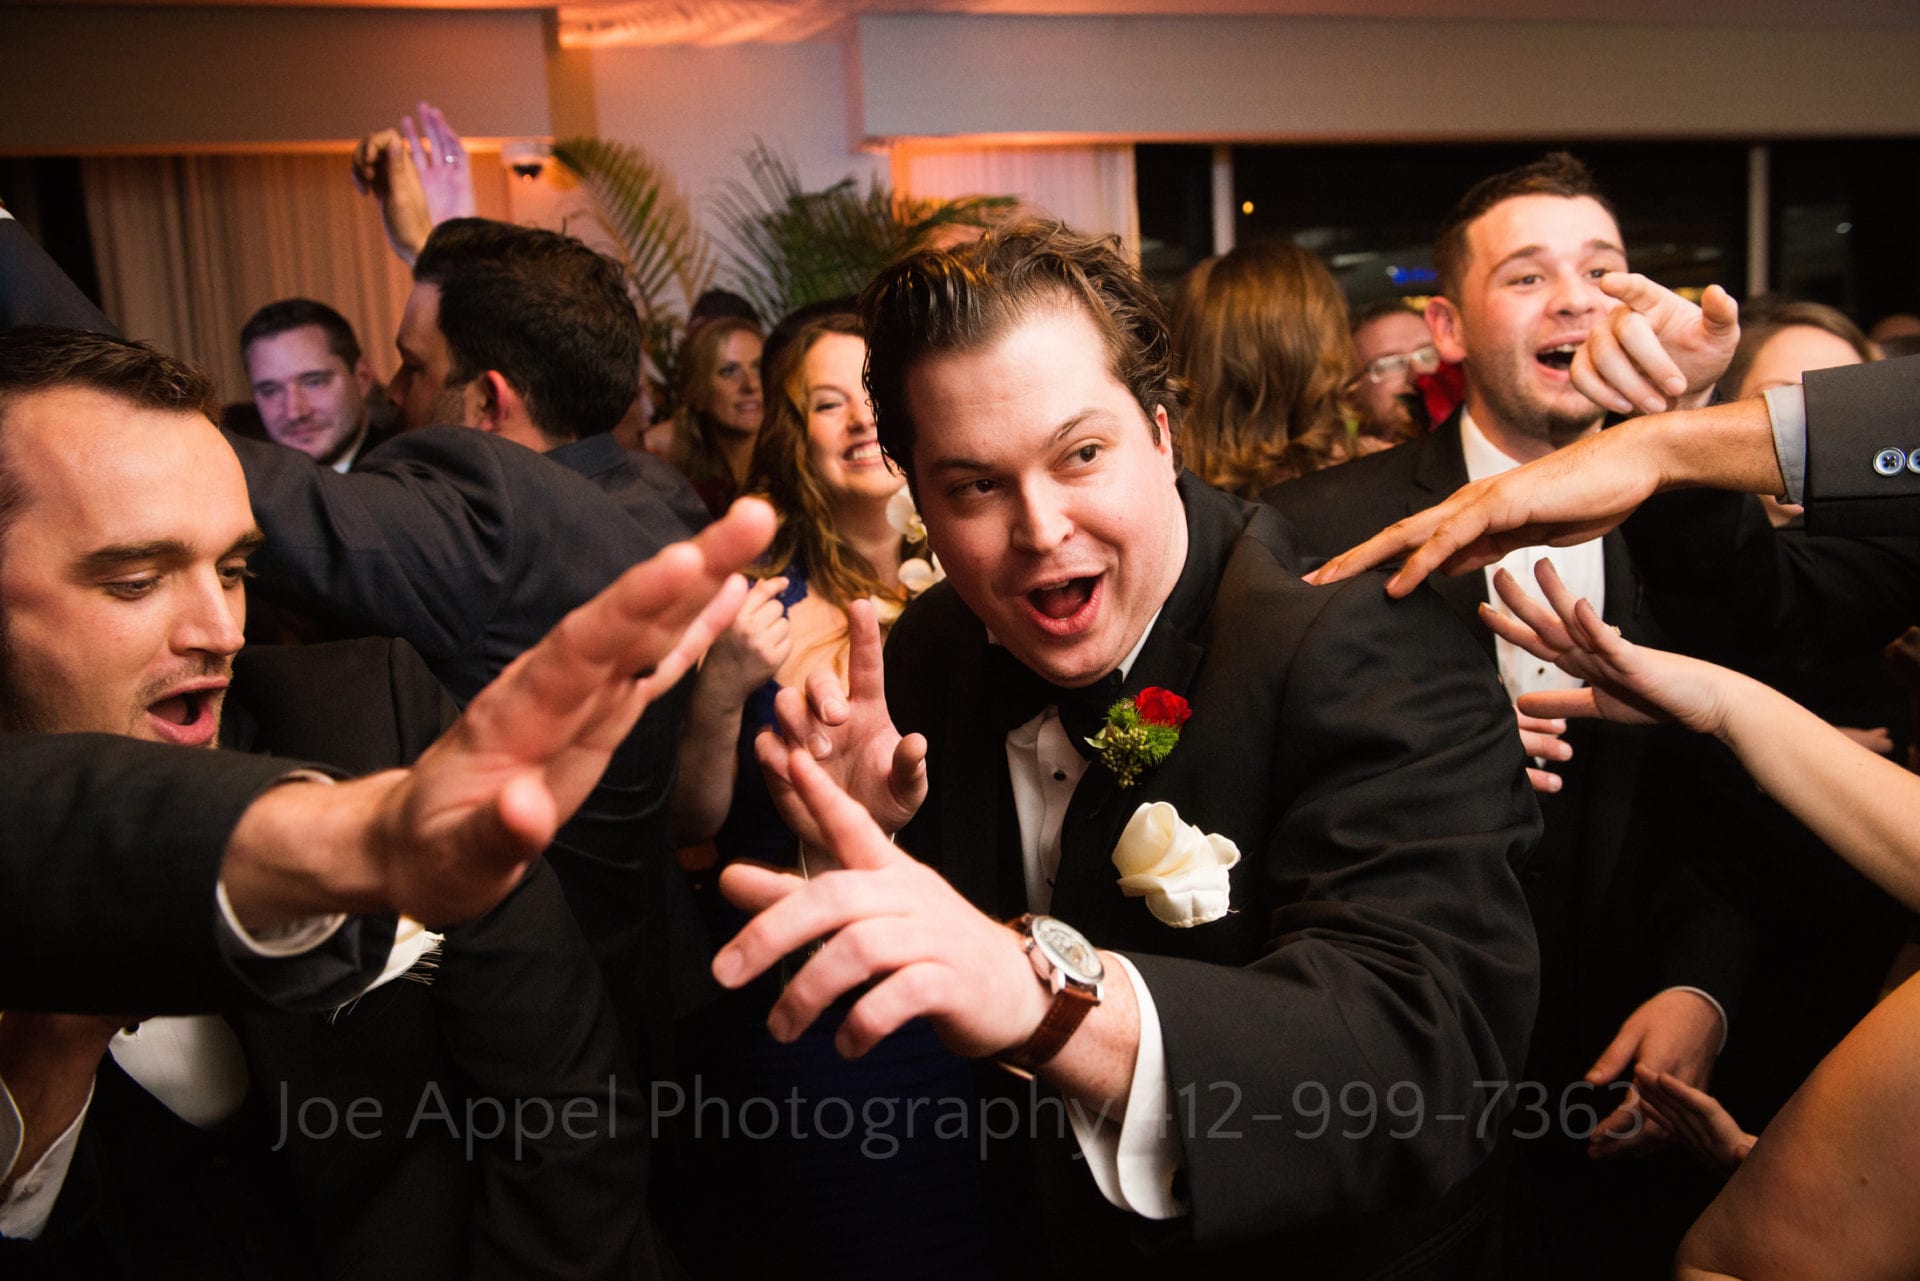 A groomsman dances and smiles while a bunch of hands point towards him.